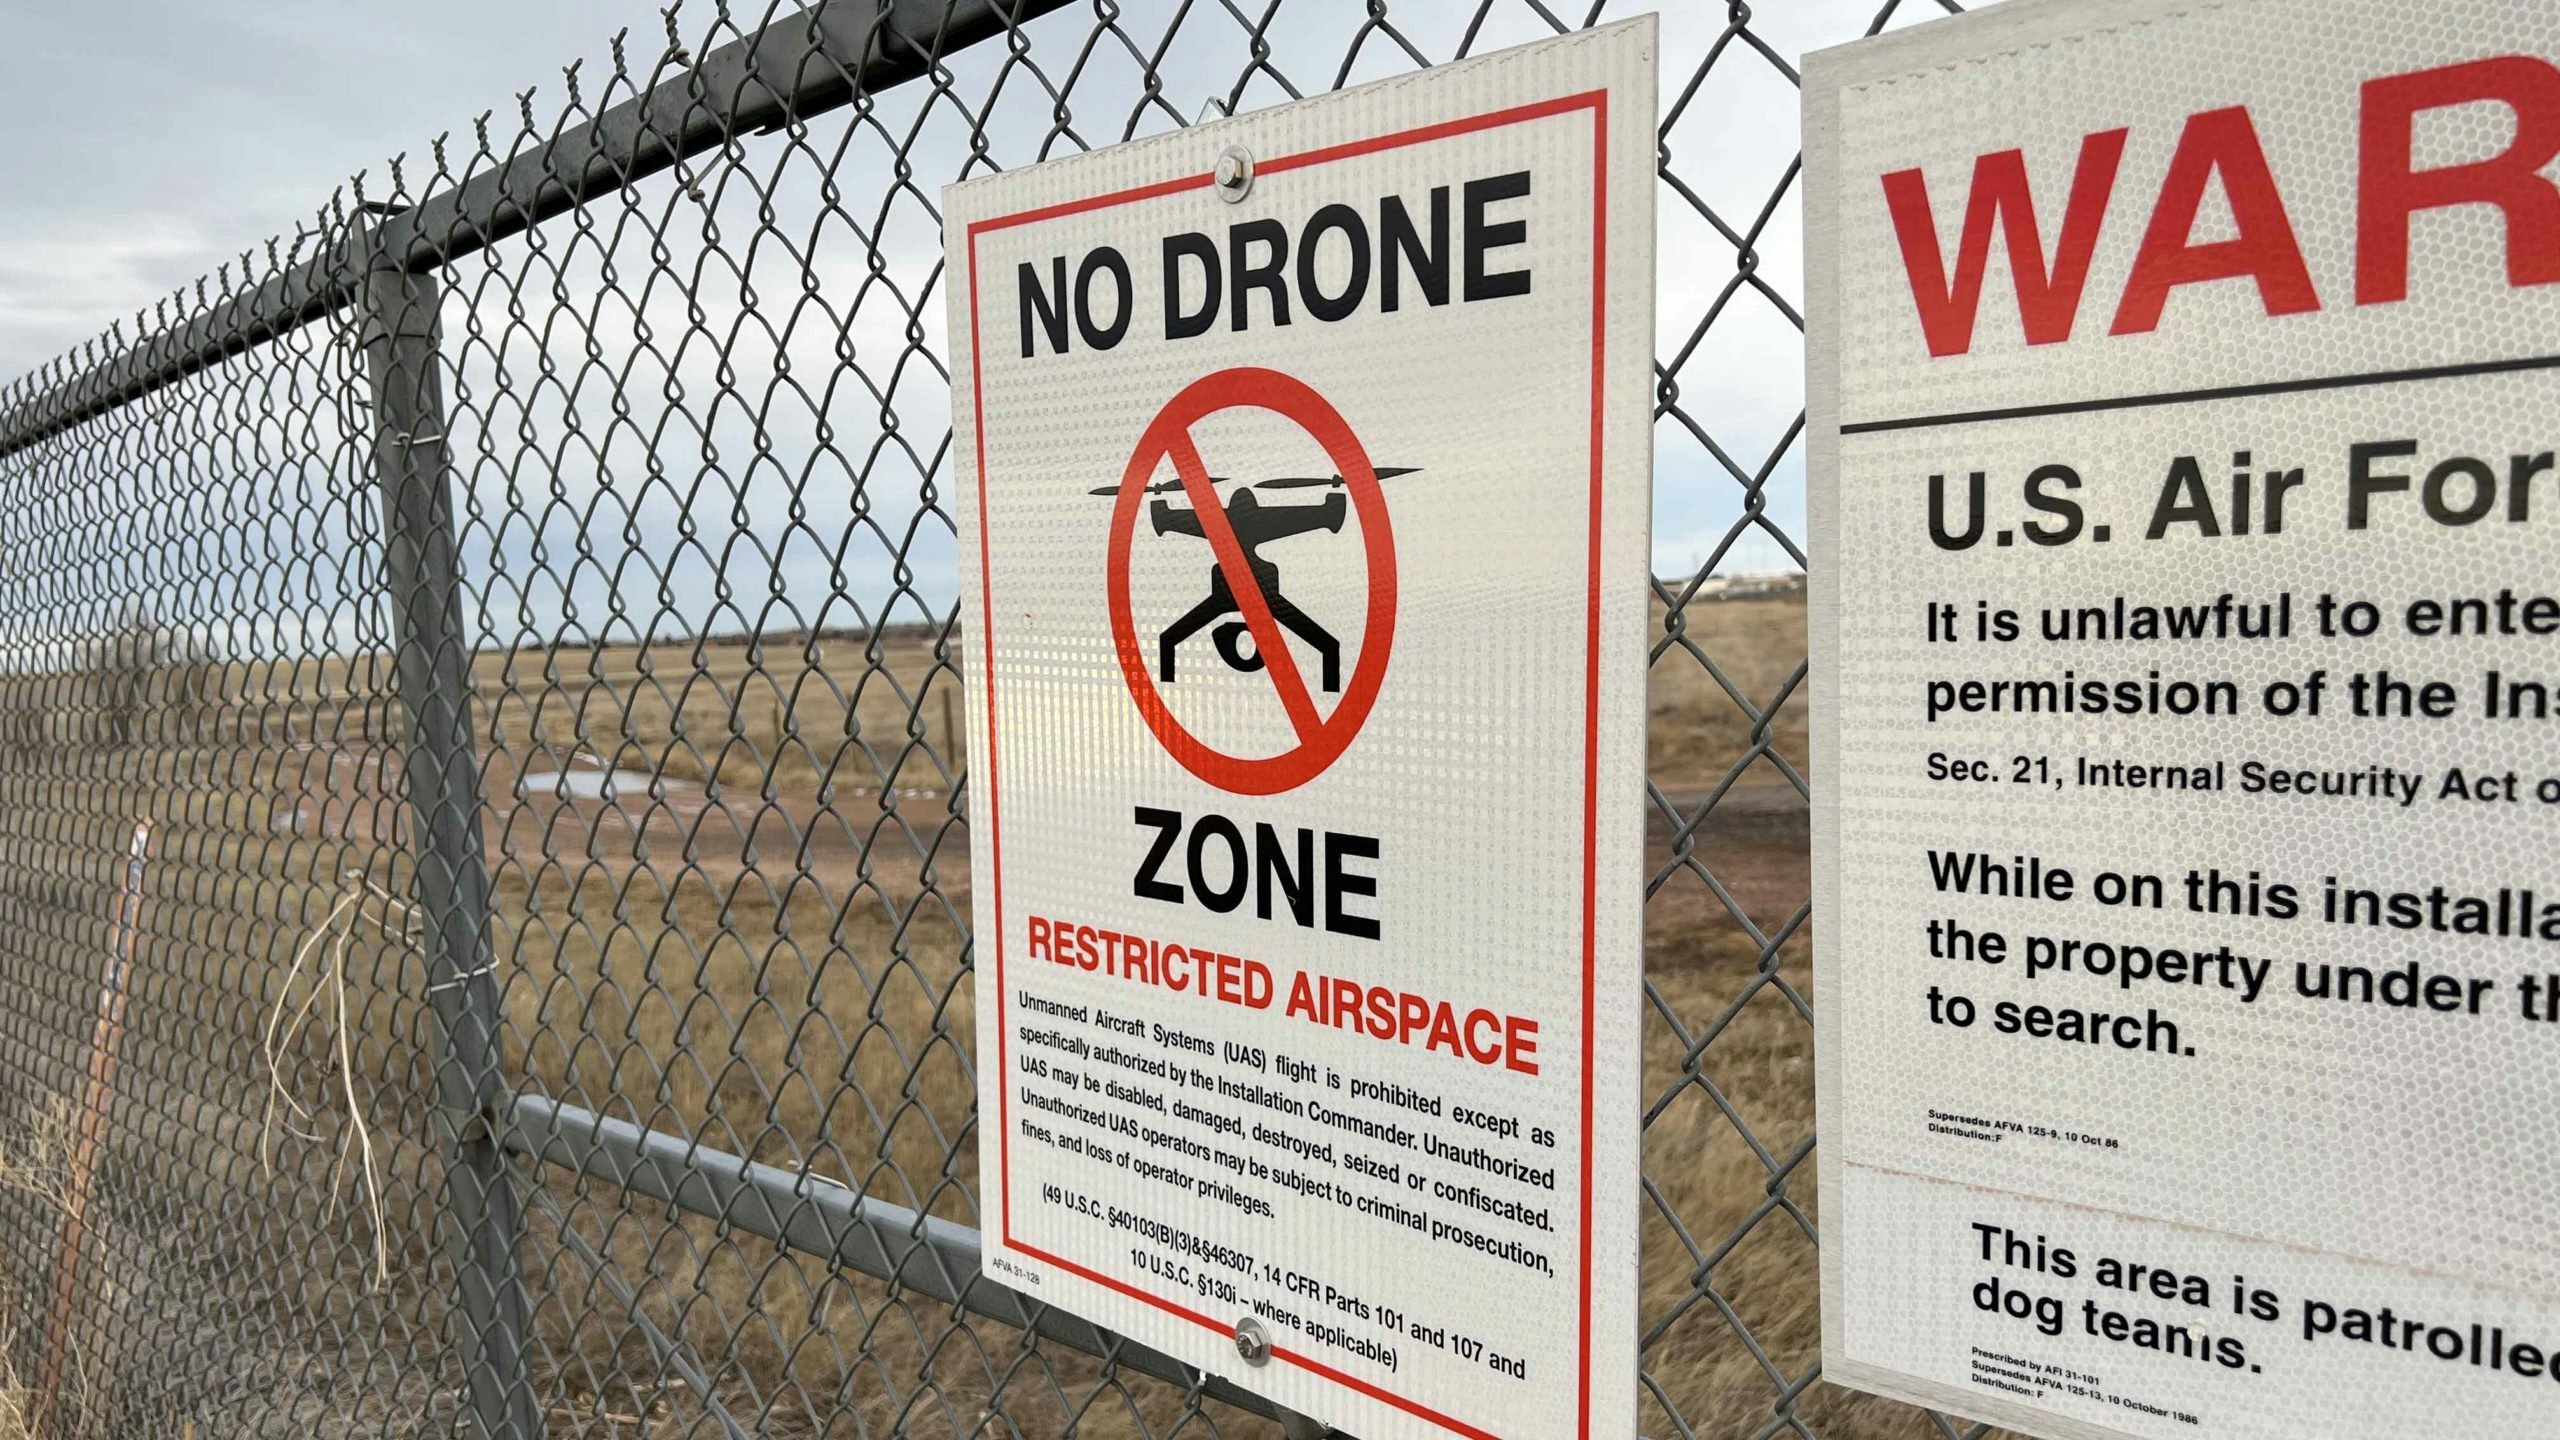 No drone sign 1 14 23 scaled